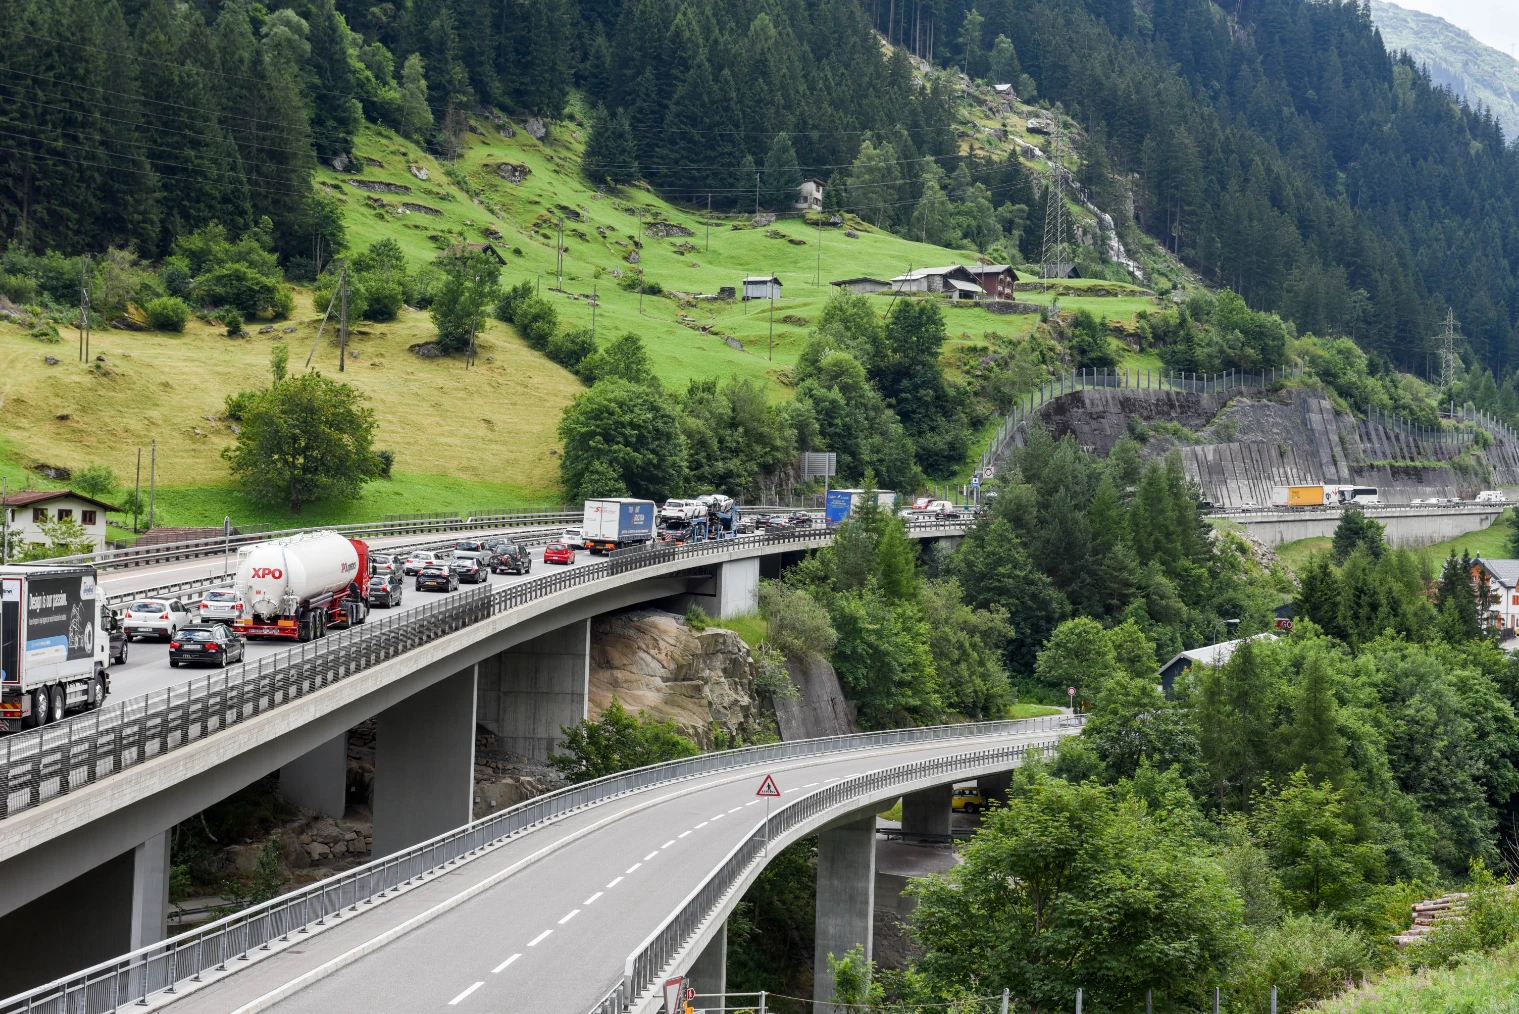 Nighttime closures in the Swiss Gotthard tunnel have ended